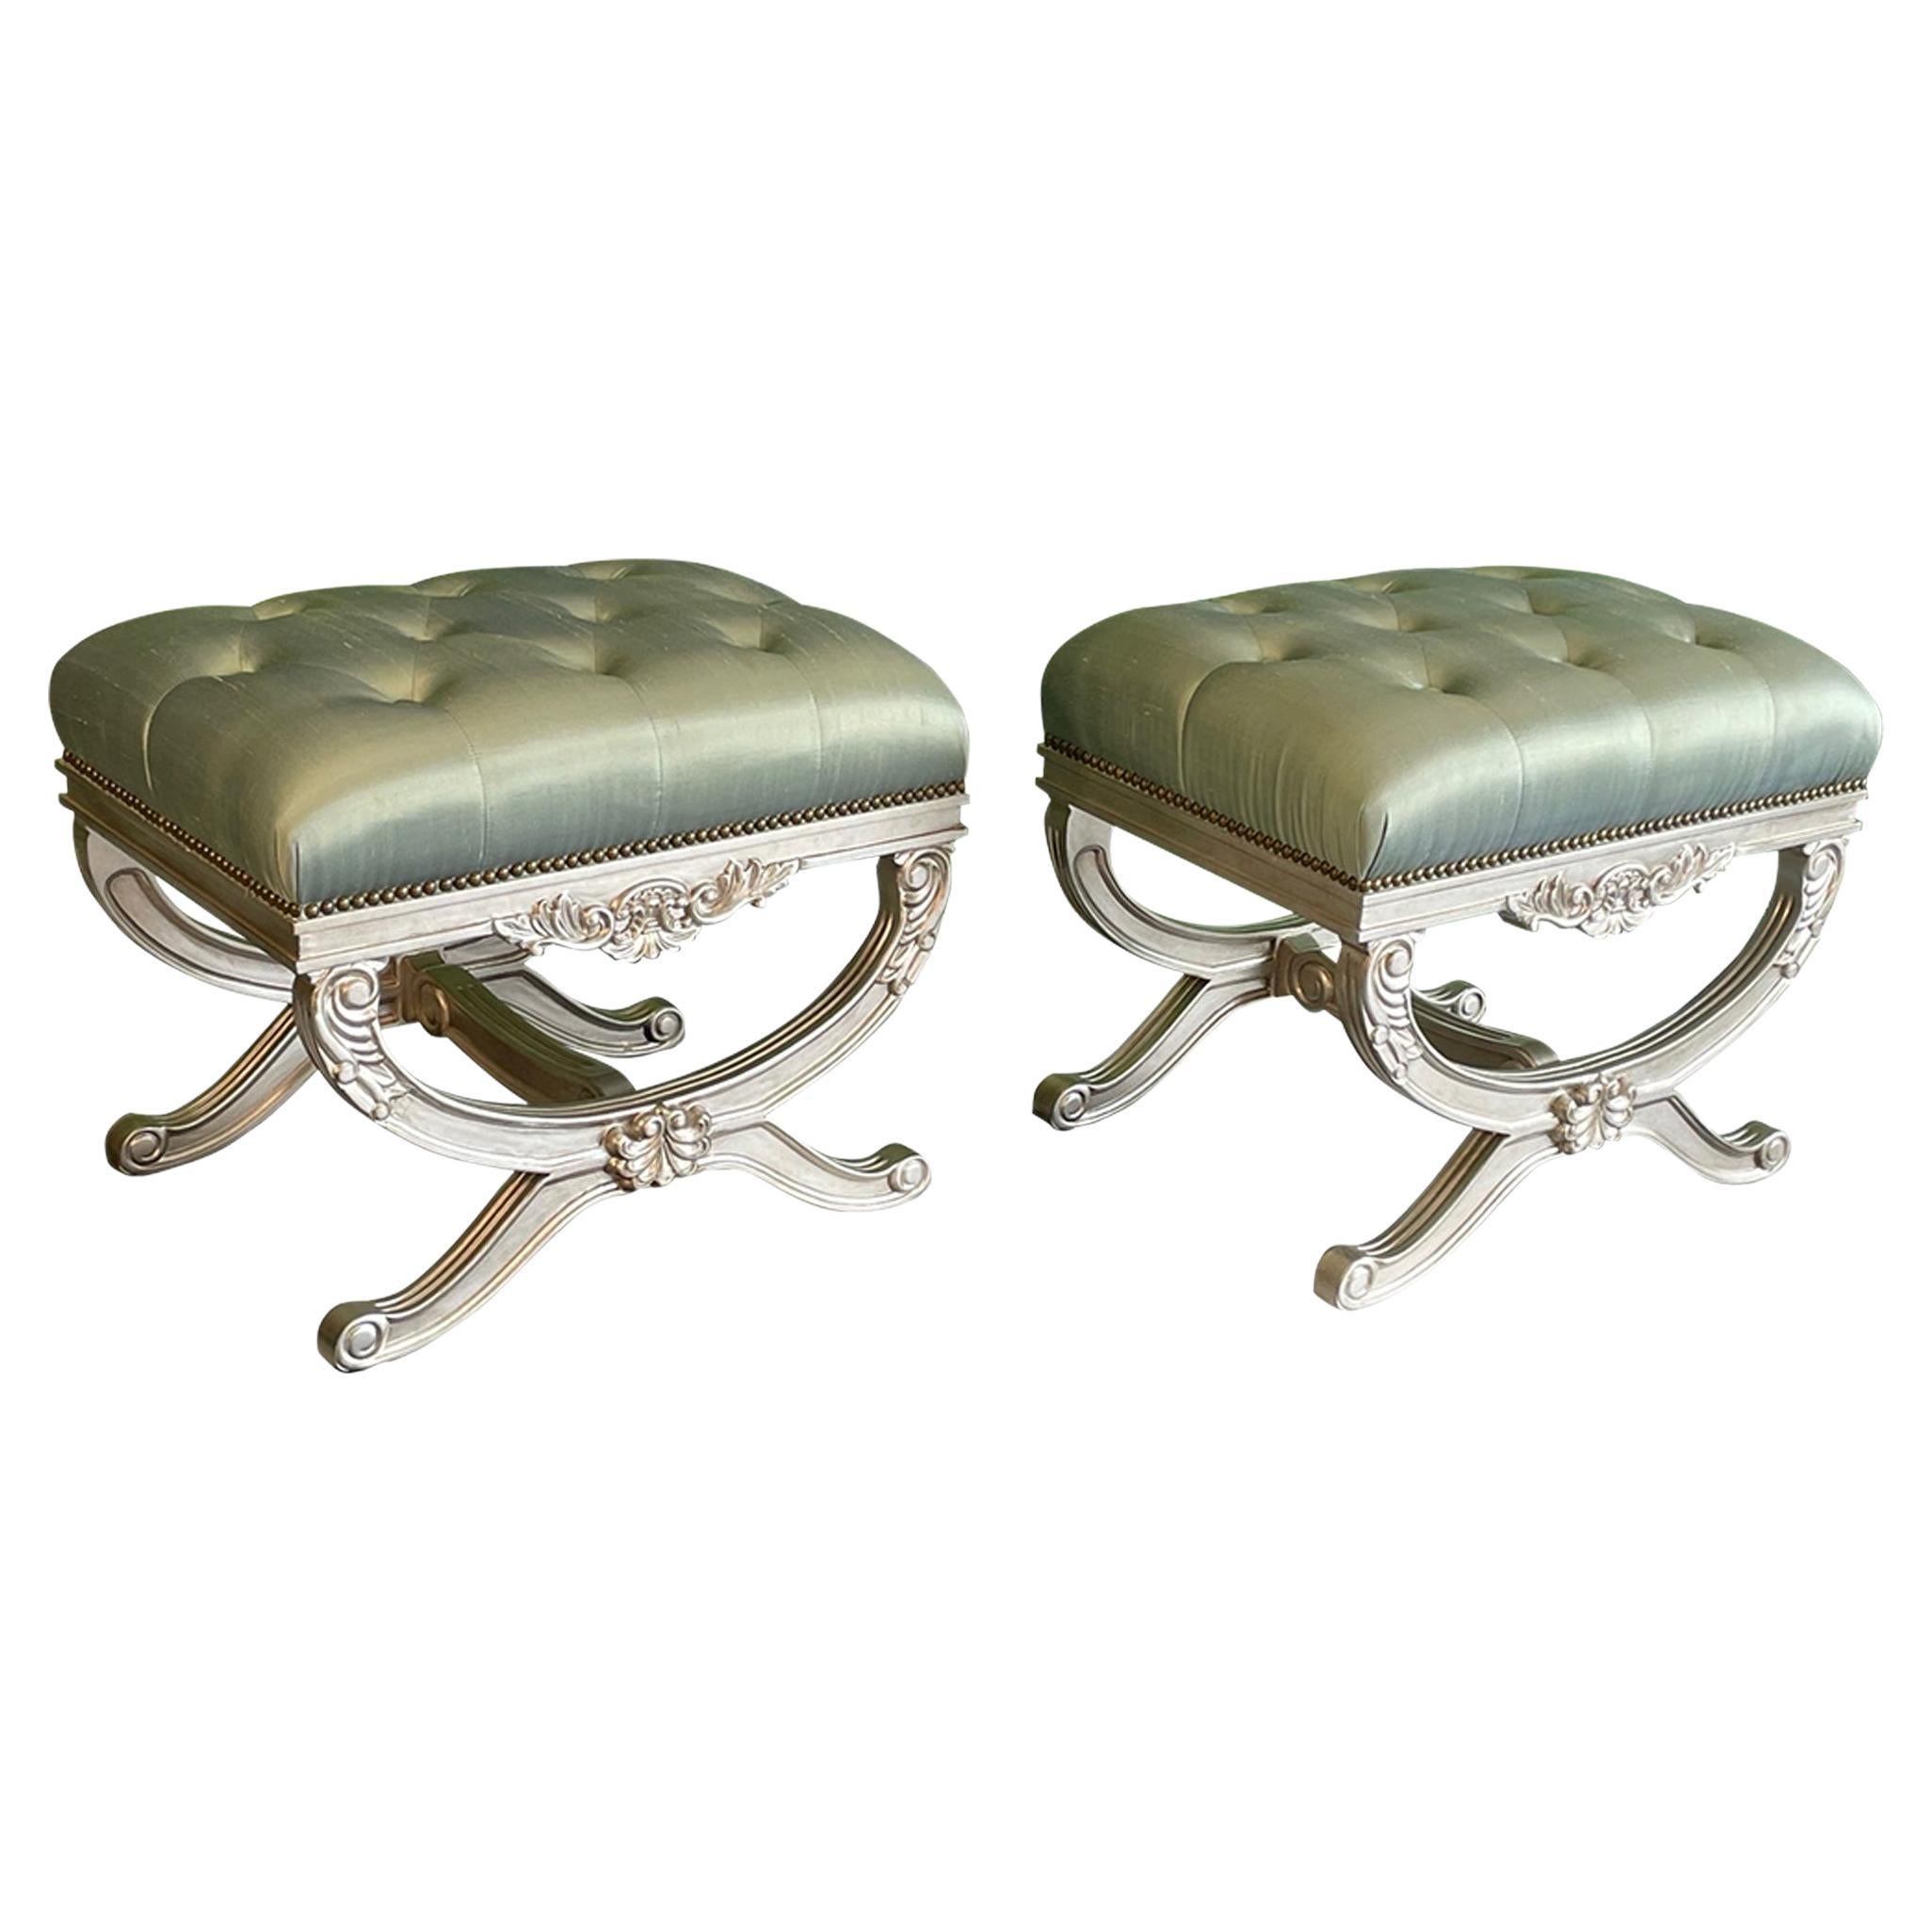 Dorothy Draper Style X Form Footstool Benches For Sale